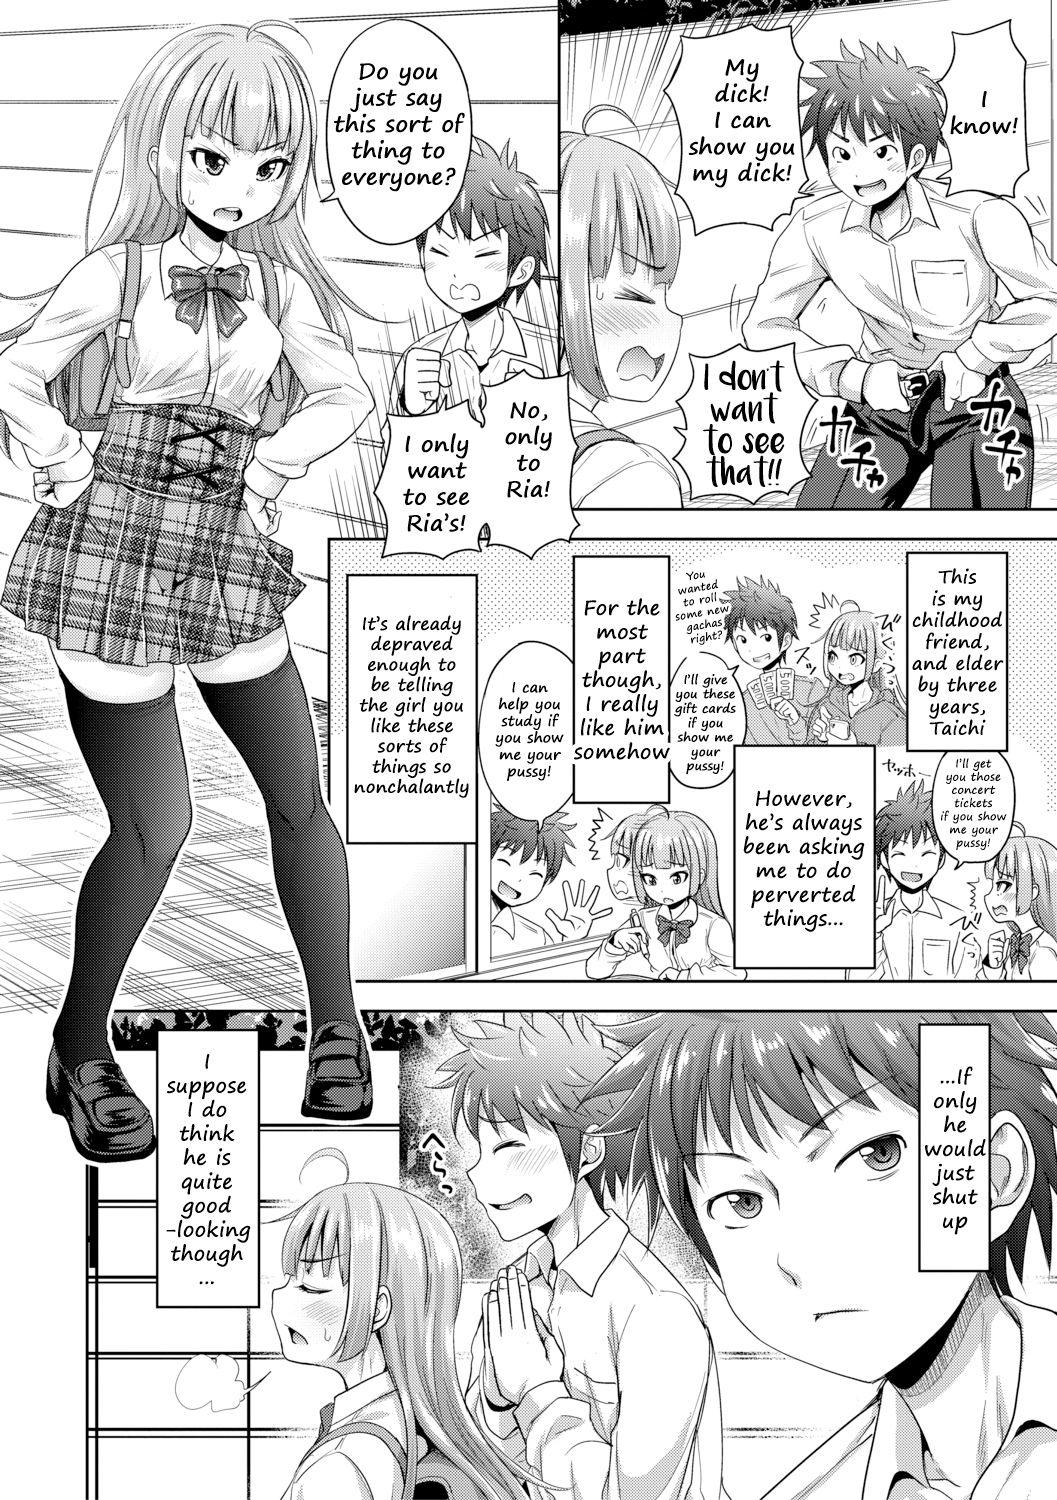 Gostosa Omanko misete! | Show me your pussy! Storyline - Page 2